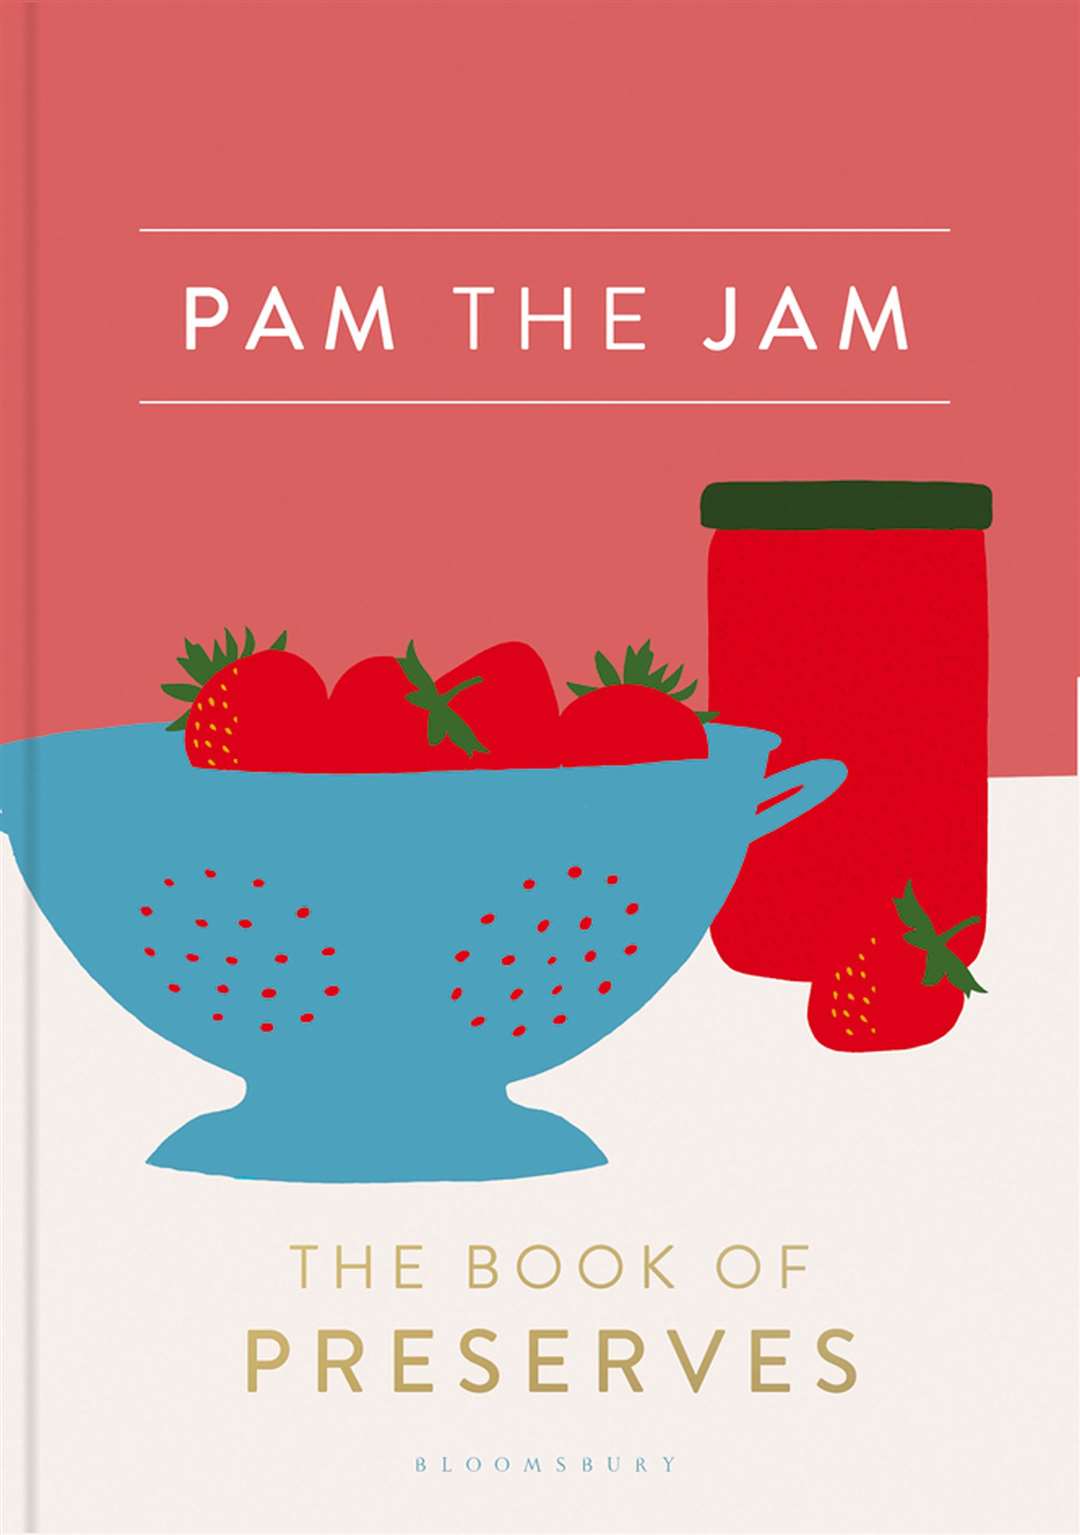 Pam The Jam: The Book Of Preserves by Pam Corbin, is published by Bloomsbury, priced £20. Available now